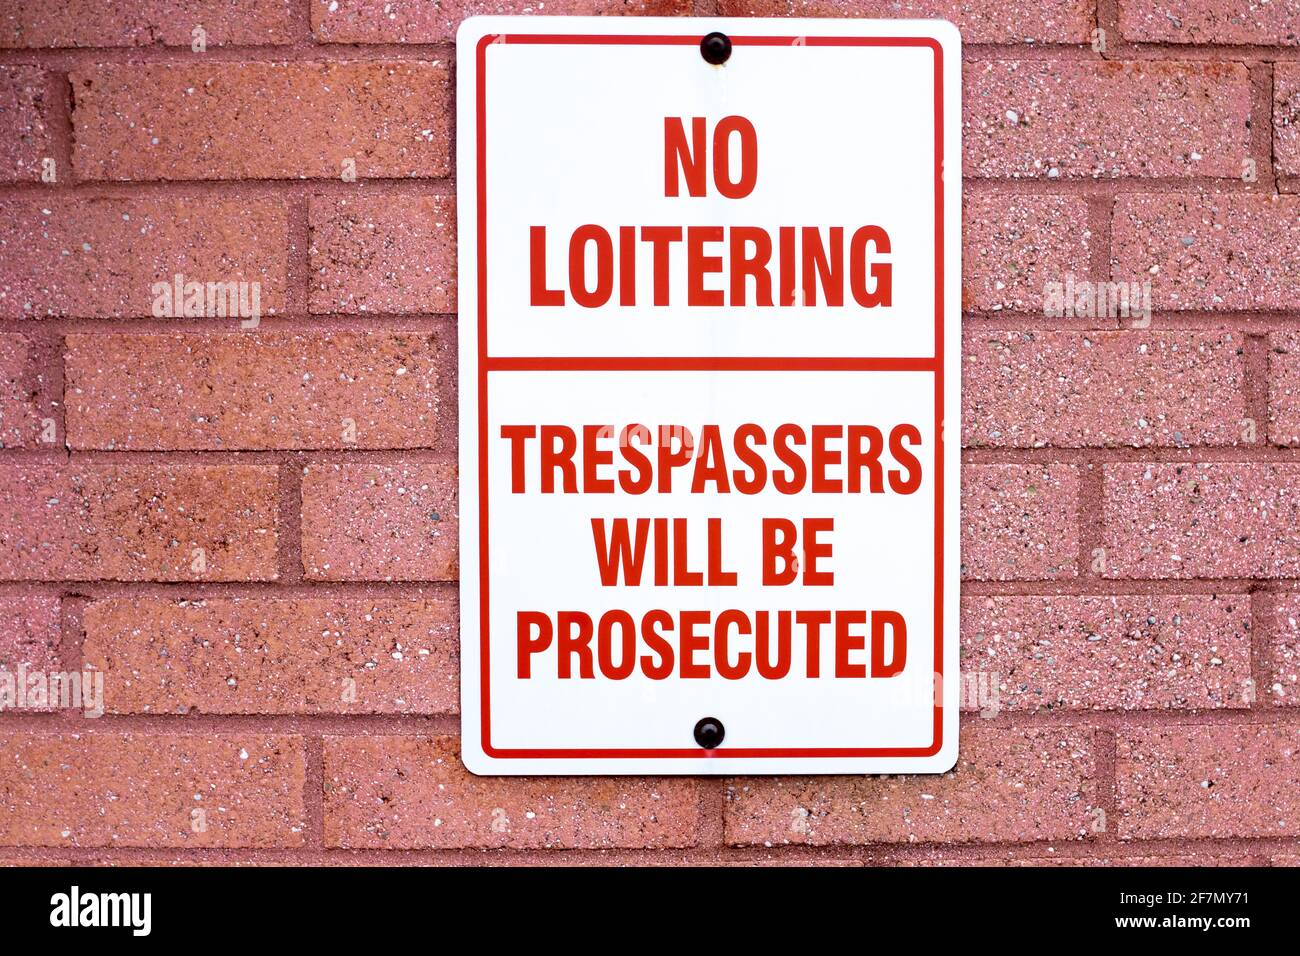 No loitering, trespasses will be prosecuted rectangular vertical sign drilled to a red brick wall in London, Ontario, Canada. Stock Photo